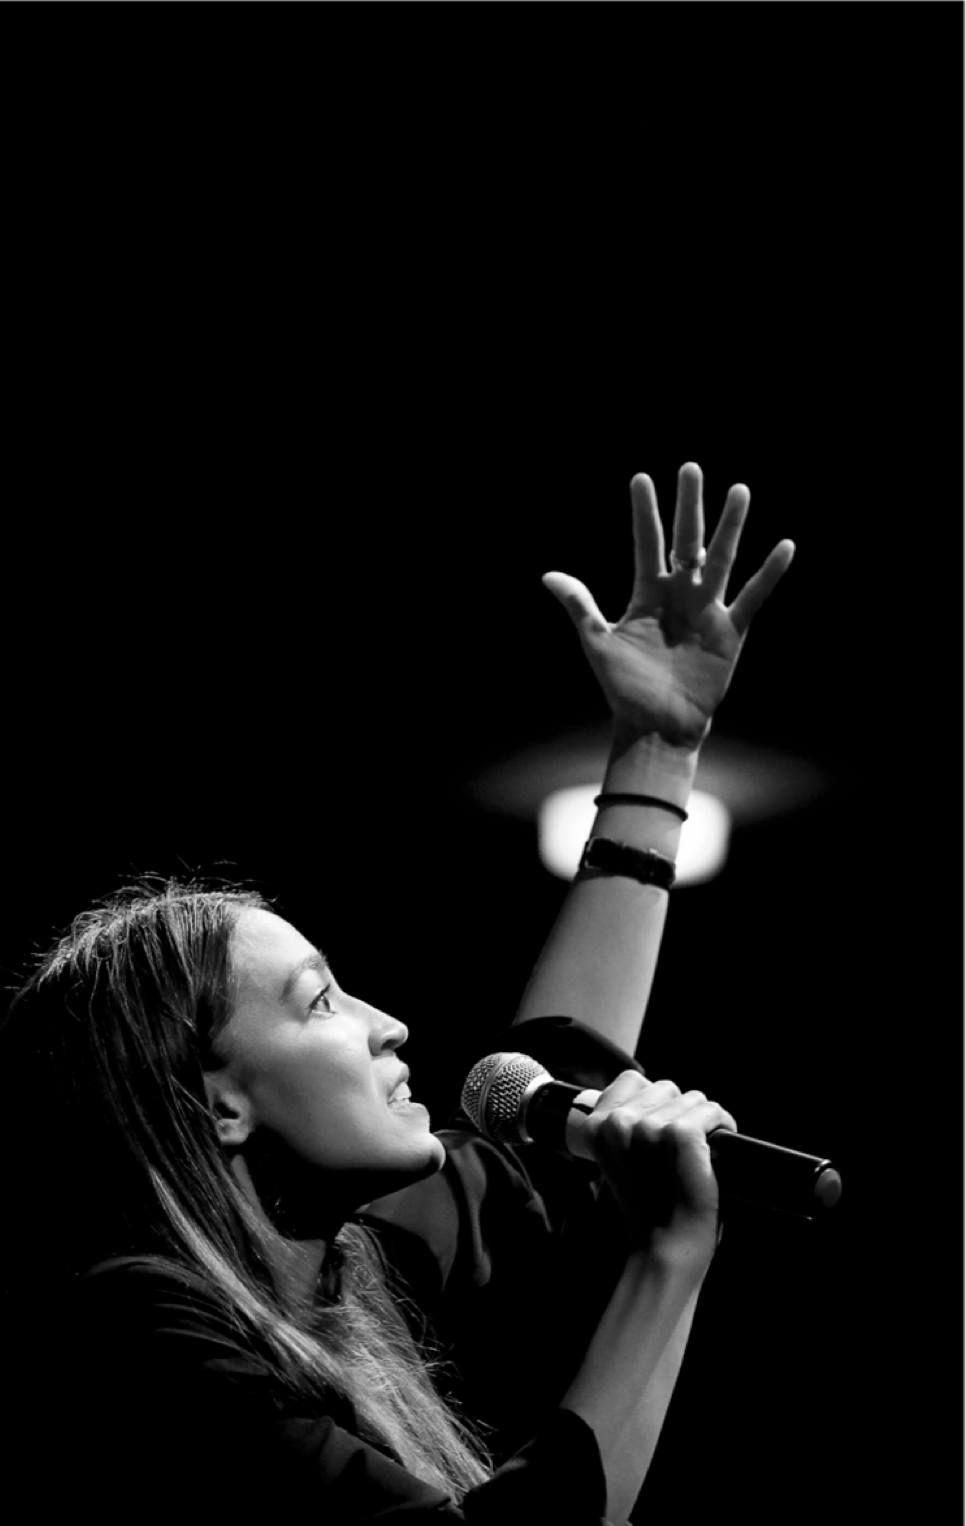 Woman singing with a hand up